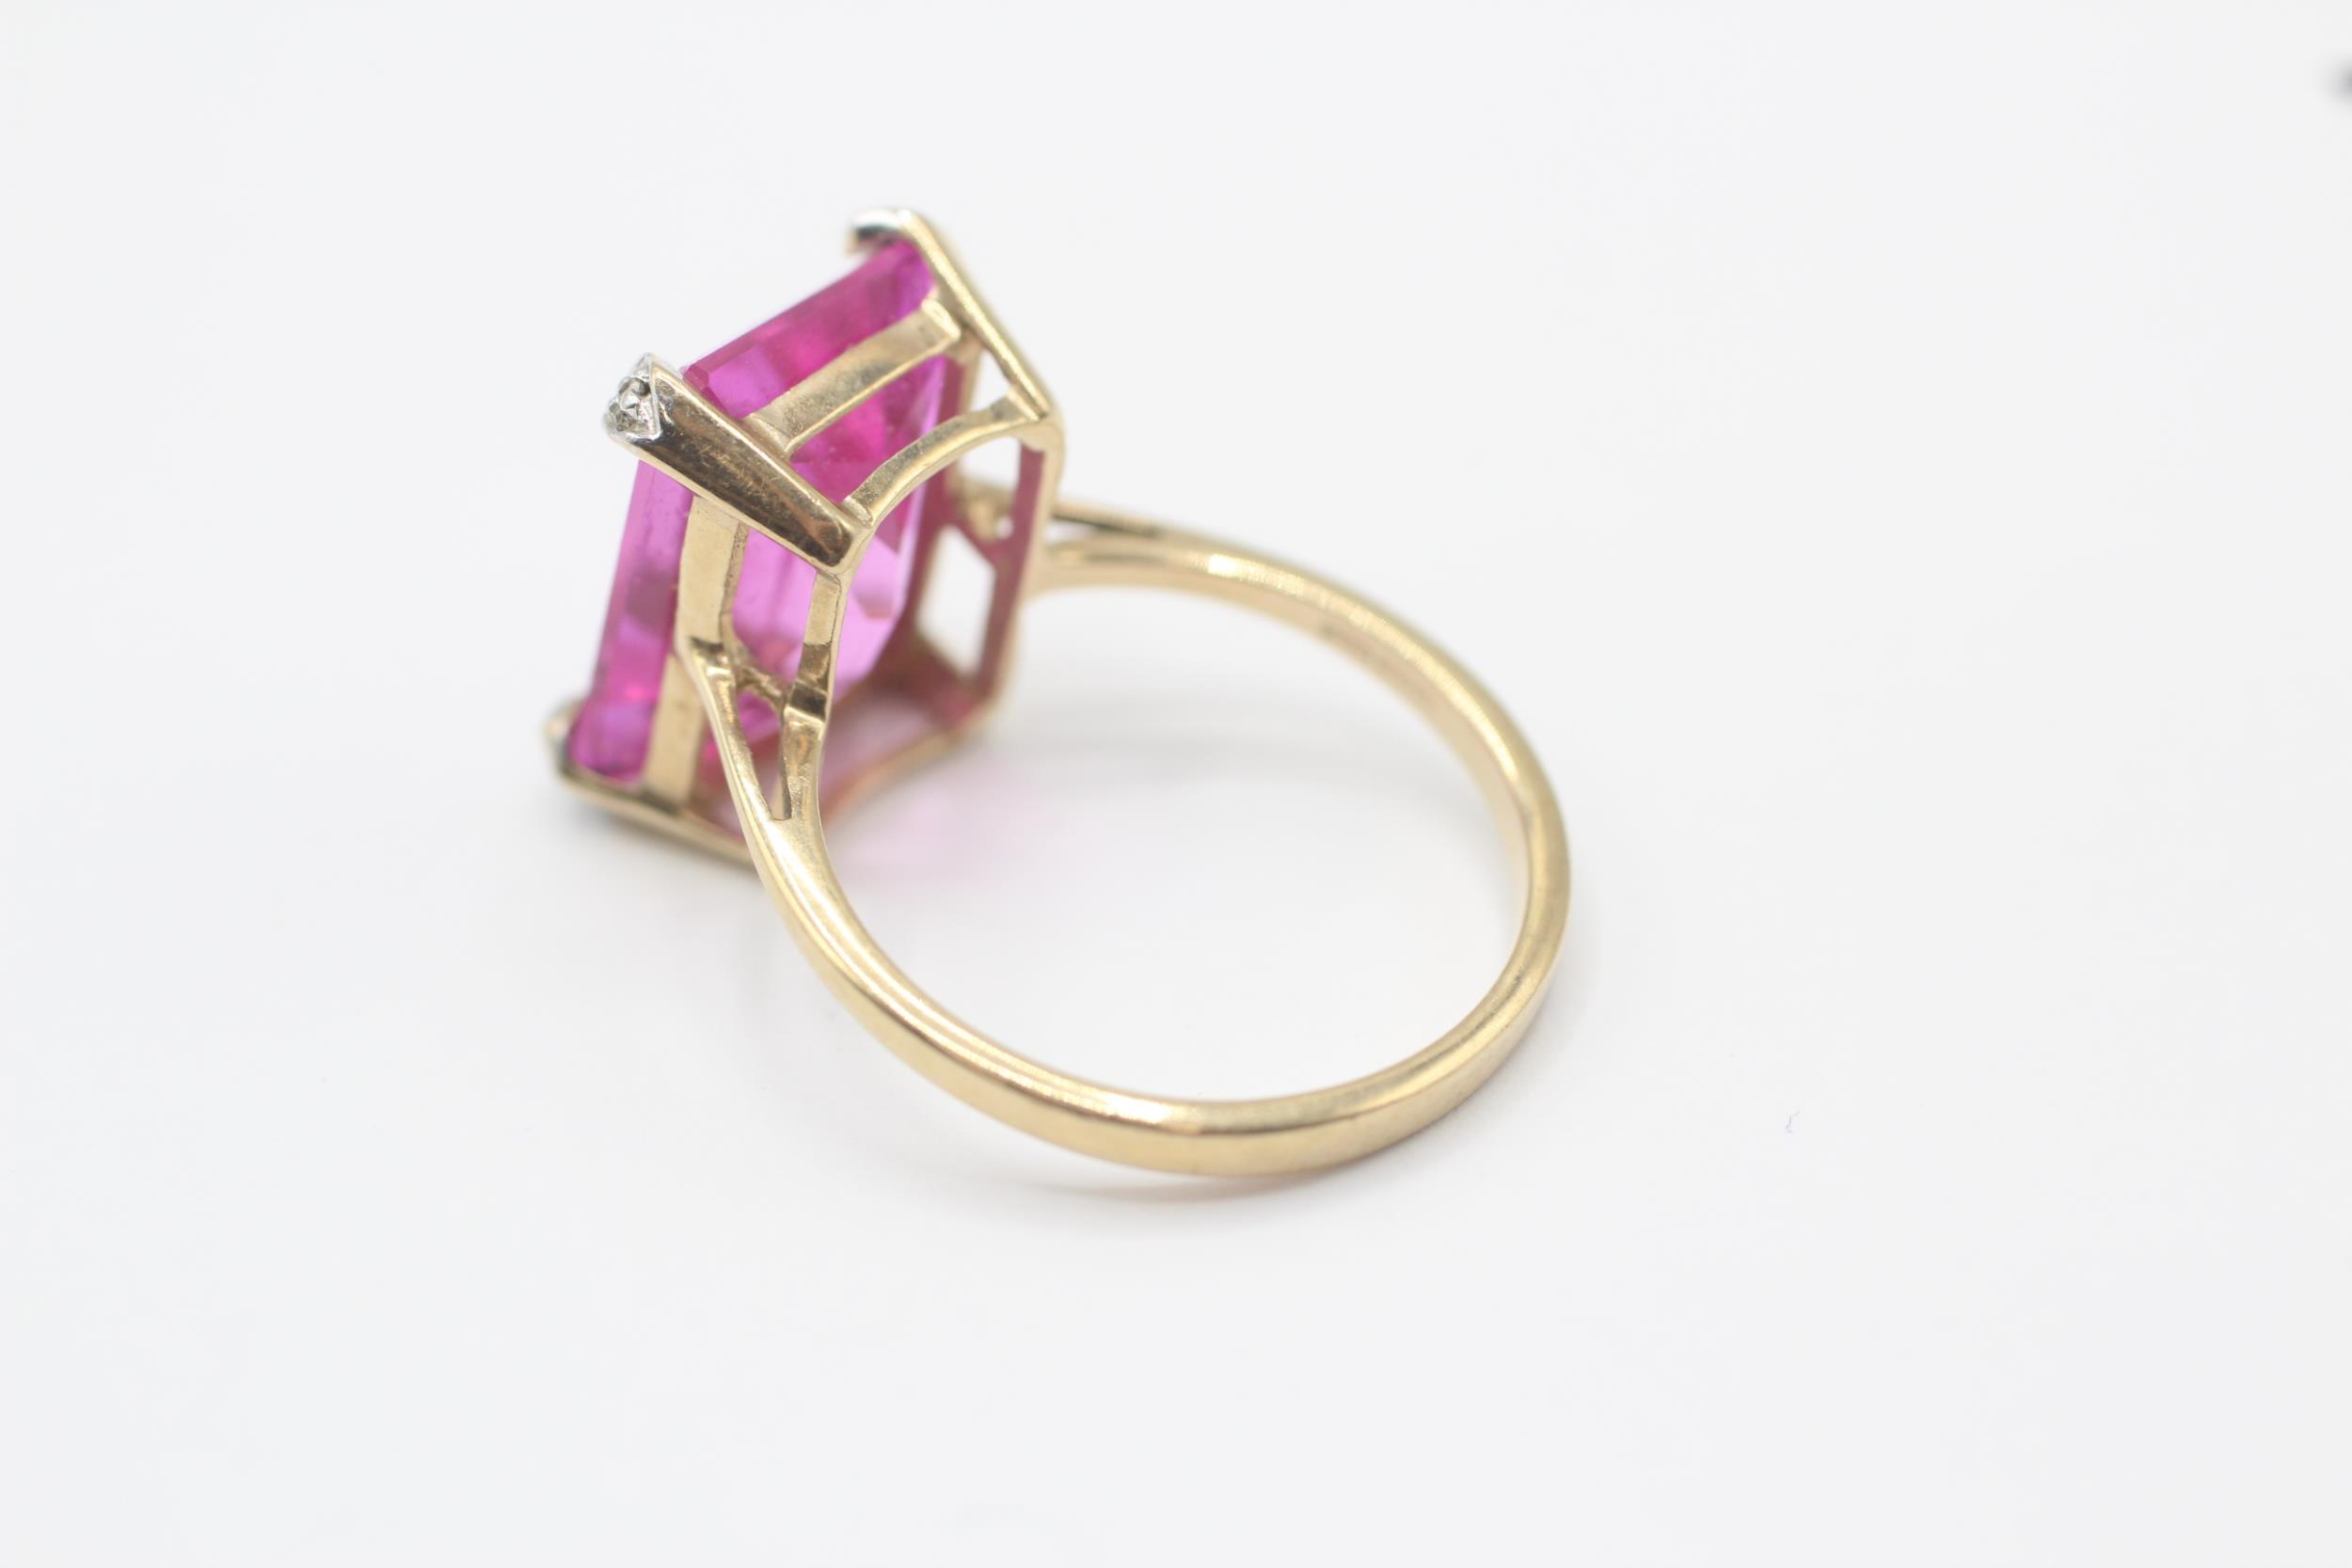 9ct gold pink gemstone and diamond cocktail ring Size N 3.9 g - Image 4 of 6